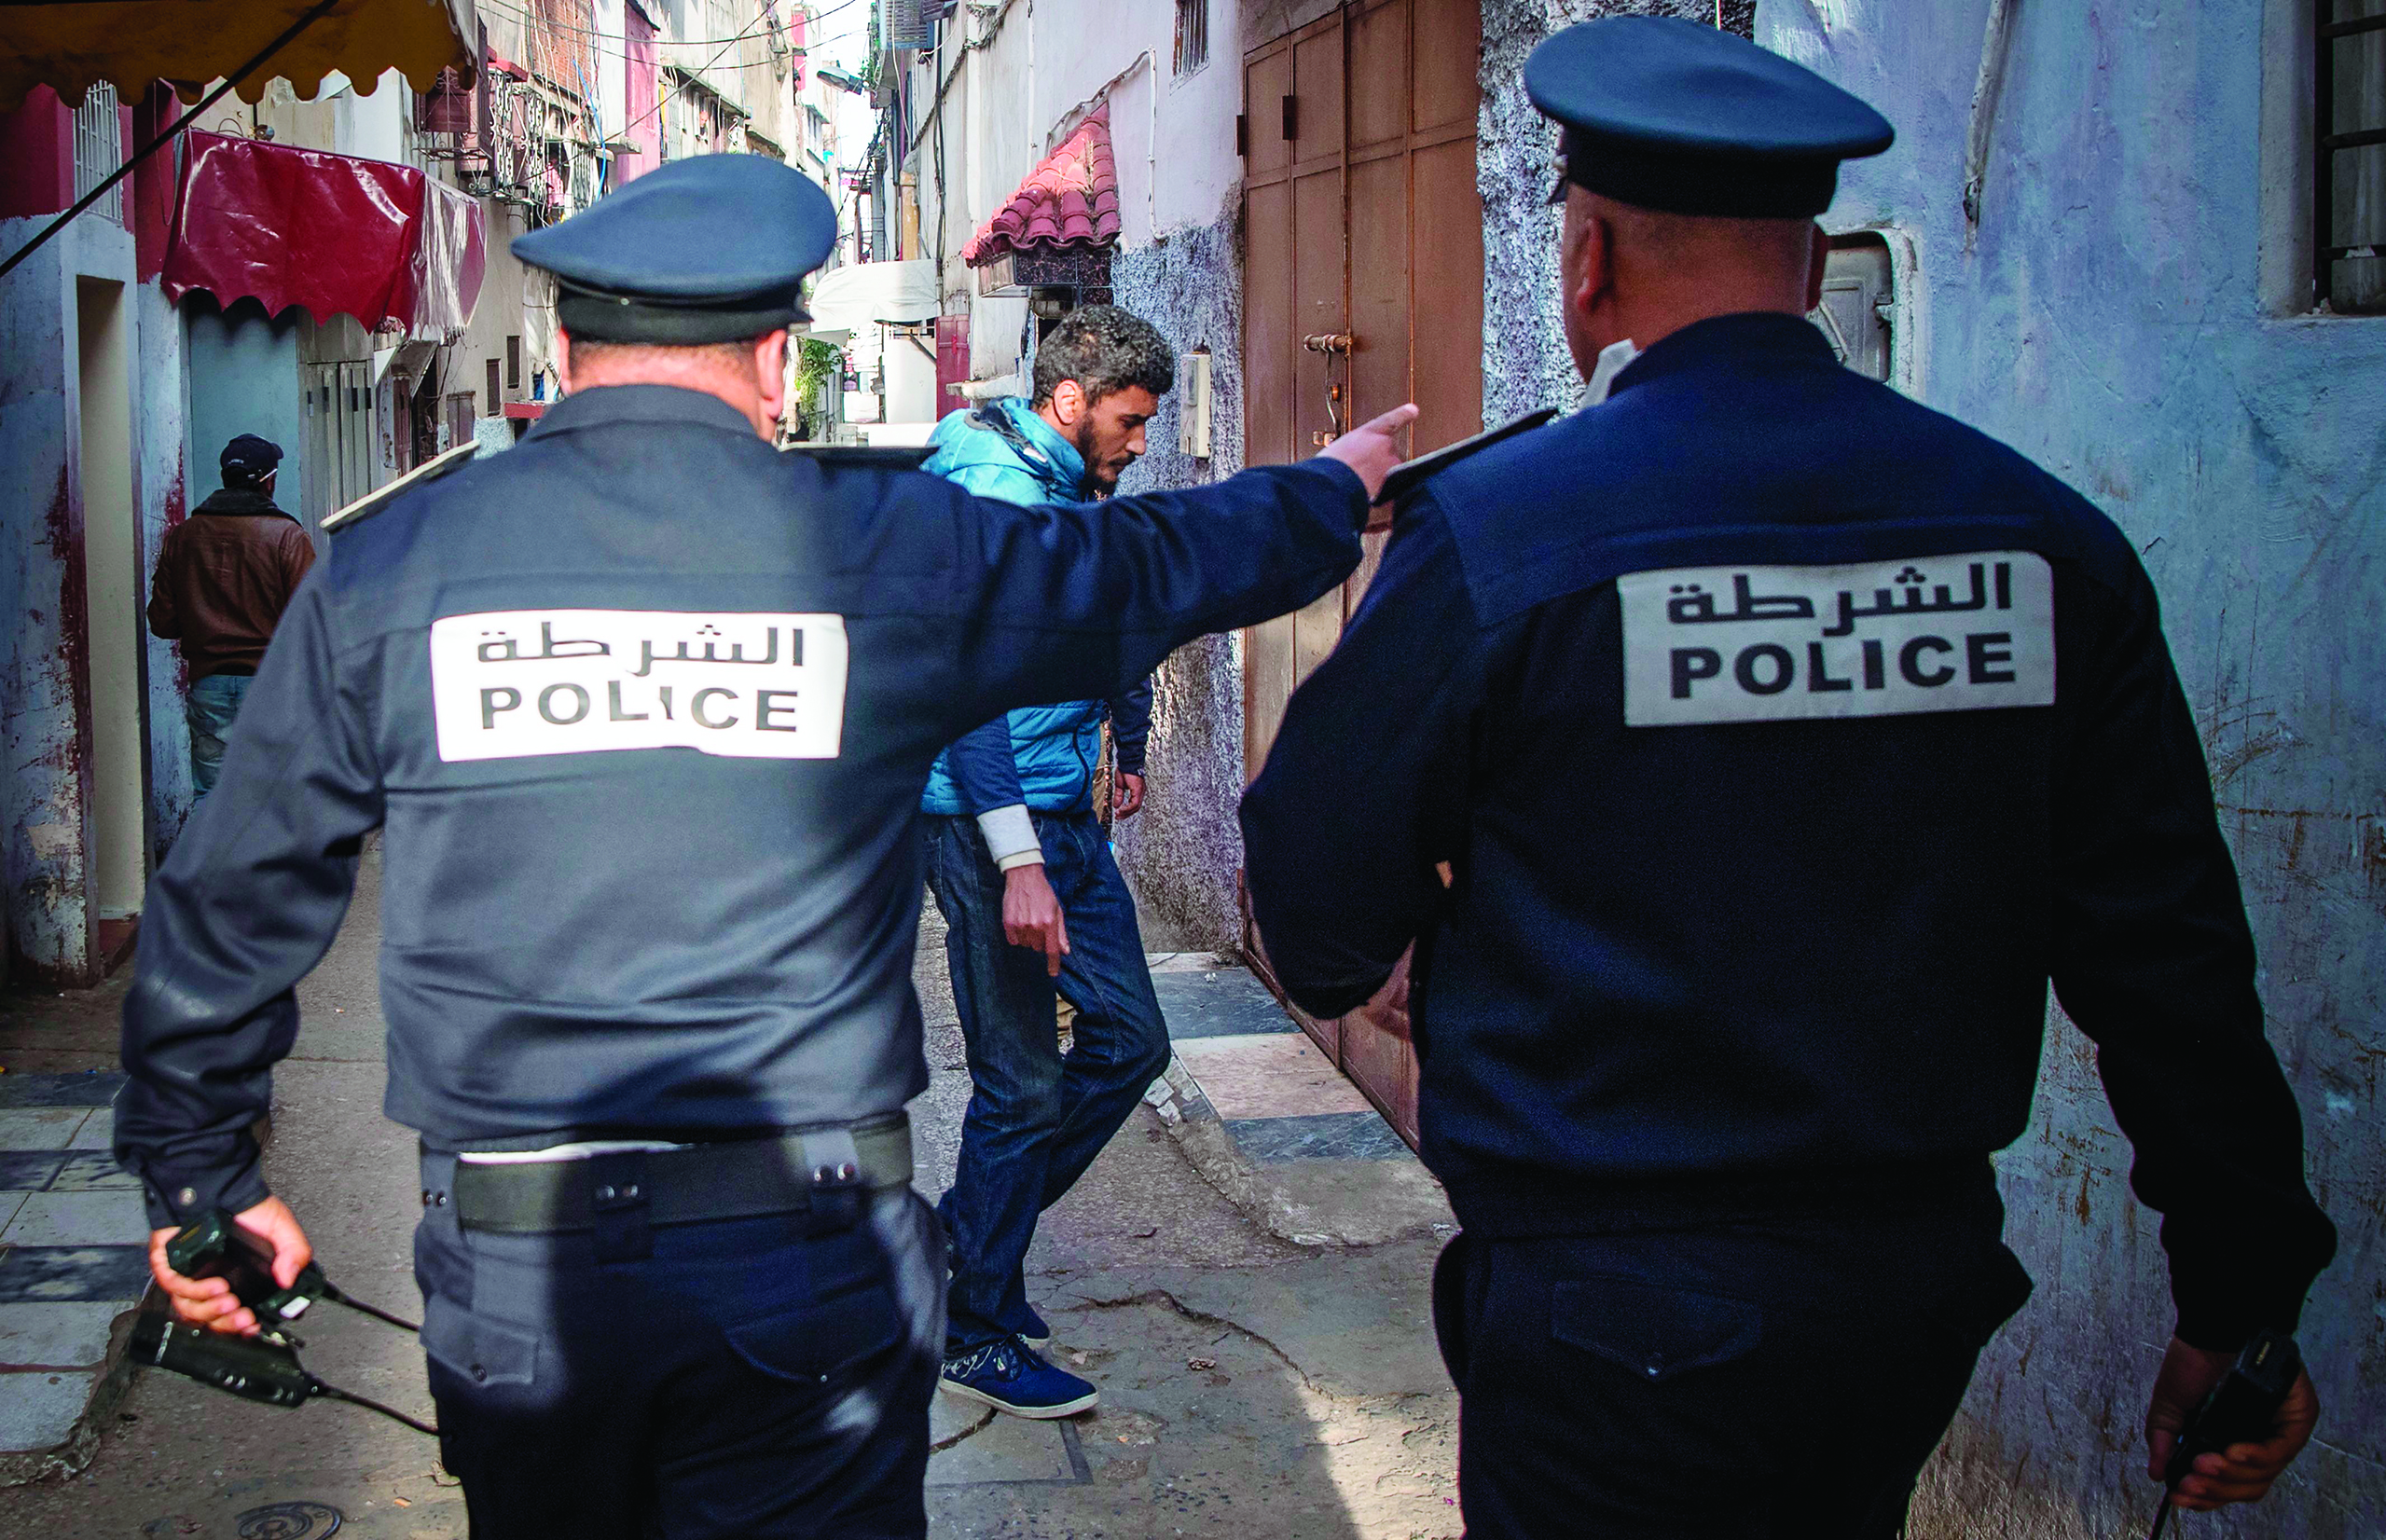 TOPSHOT - Moroccan policemen, patrolling as part of a larger combined security force, instruct people to return to and remain at home as a measure against the COVID-19 coronavirus pandemic in the capital Rabat's district of Takadoum on March 27, 2020. (Photo by FADEL SENNA / AFP)